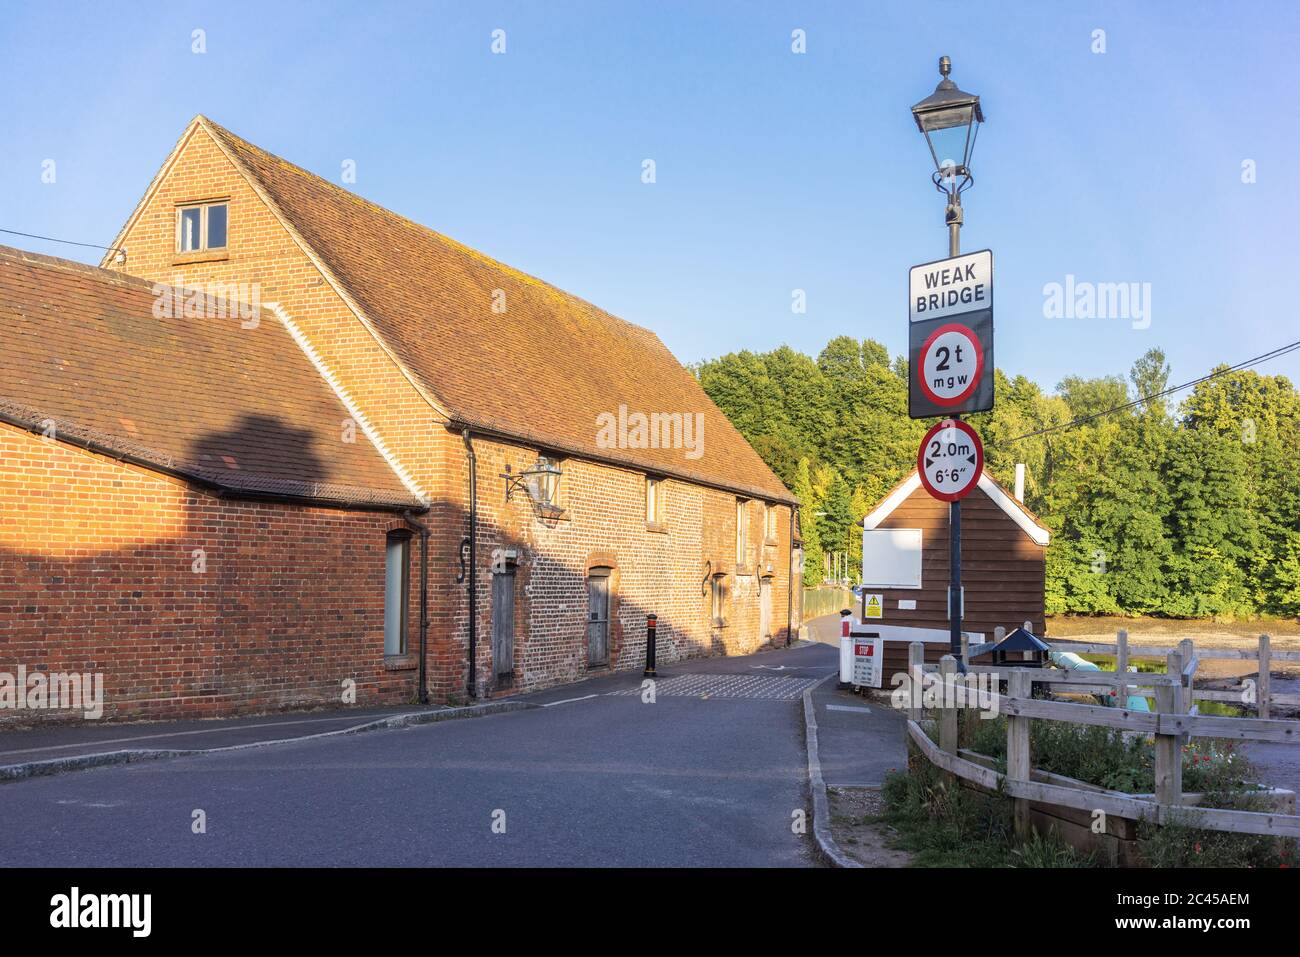 Eling Tide Mill -  a grade ii listed building and museum in Eling, part of Totton and Eling civil parish, New Forest, Hampshire, England, UK Stock Photo